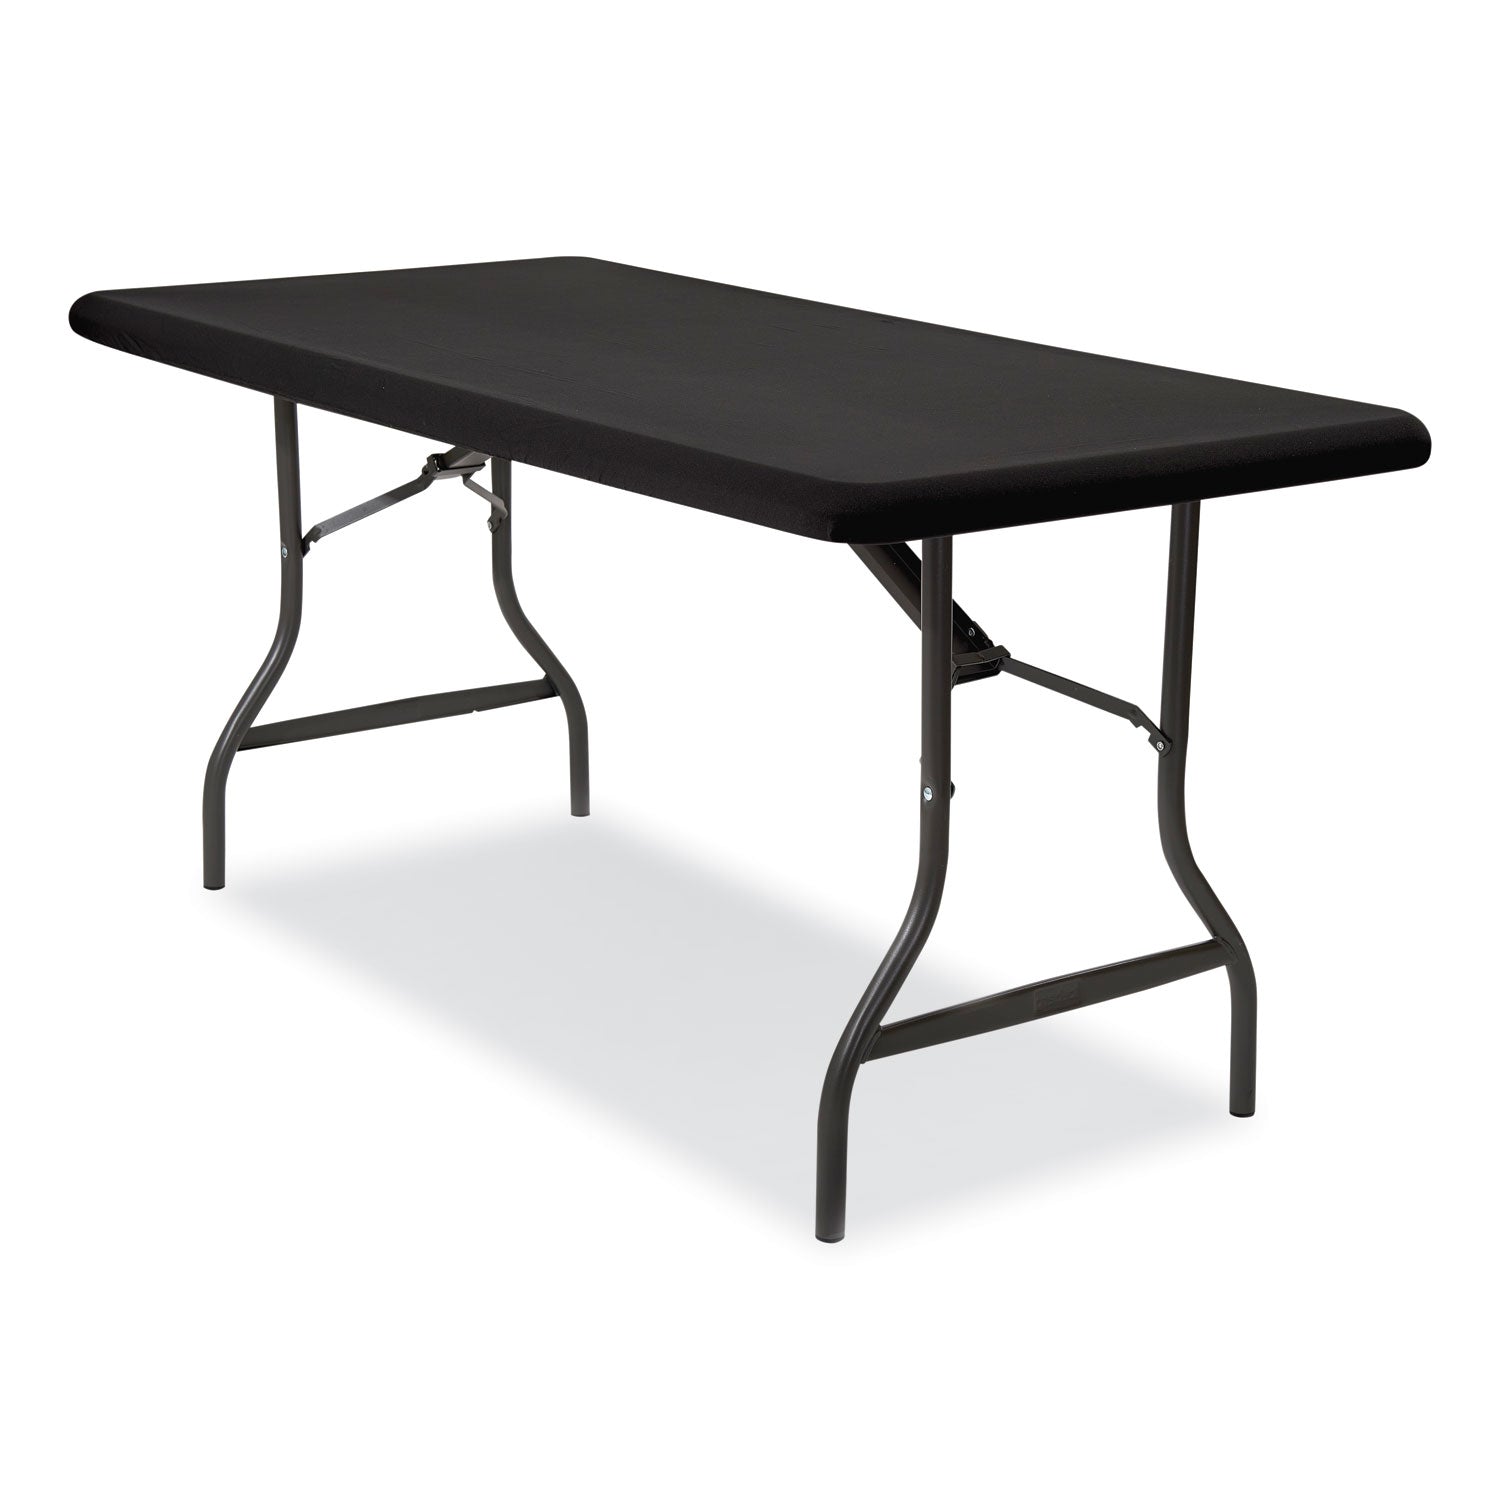 igear-fabric-table-top-cap-cover-polyester-30-x-96-black_ice16631 - 2